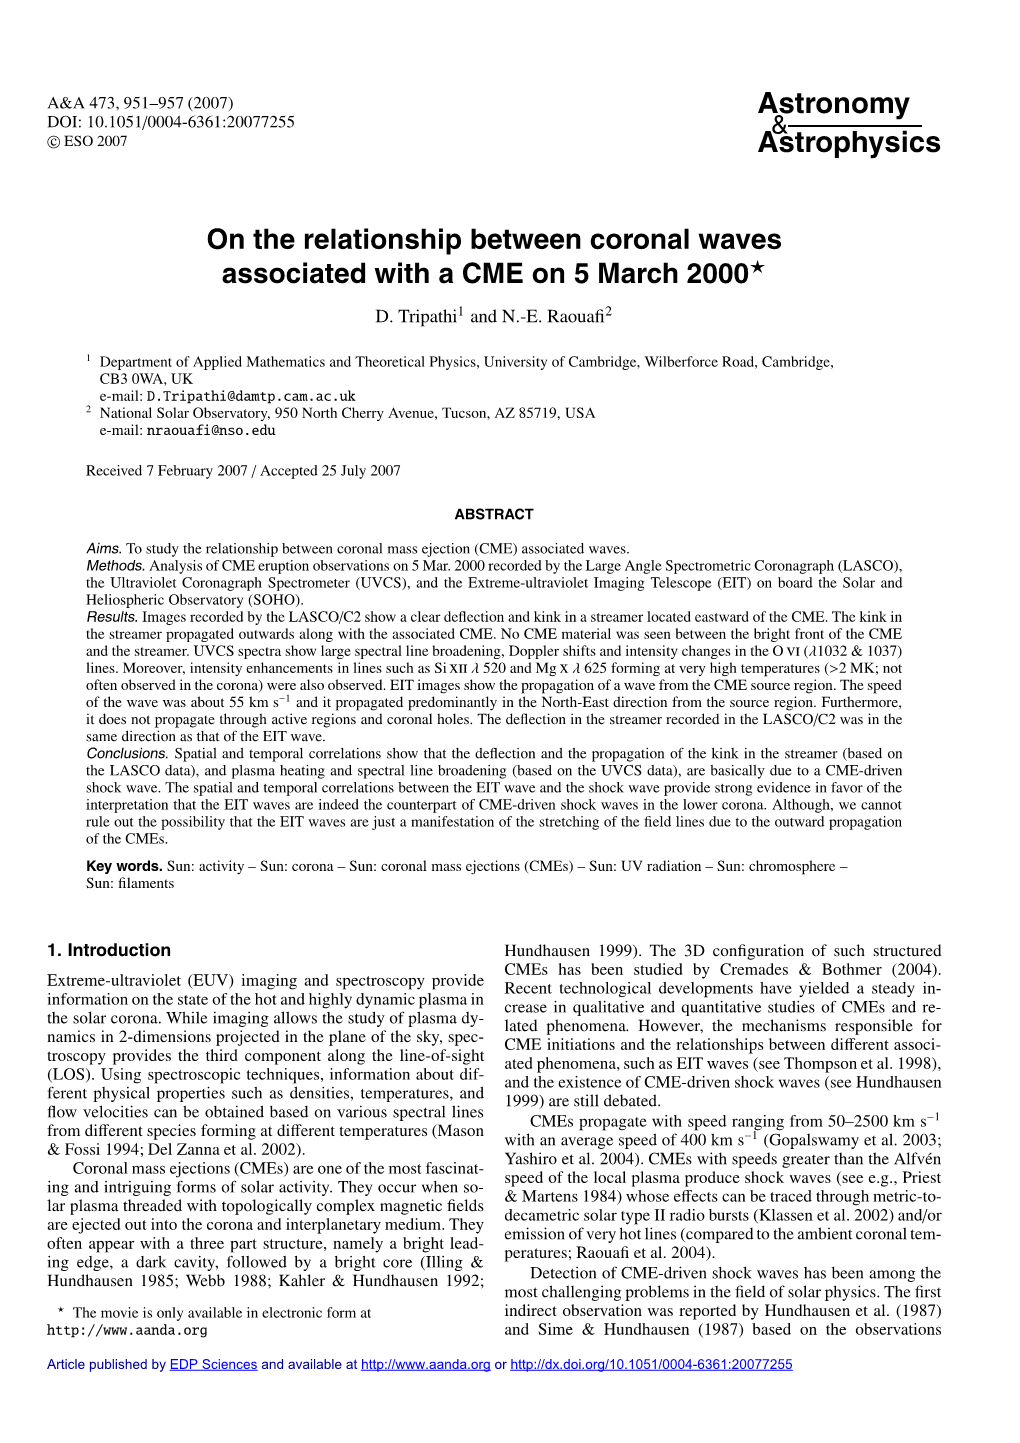 On the Relationship Between Coronal Waves Associated with a CME on 5 March 2000